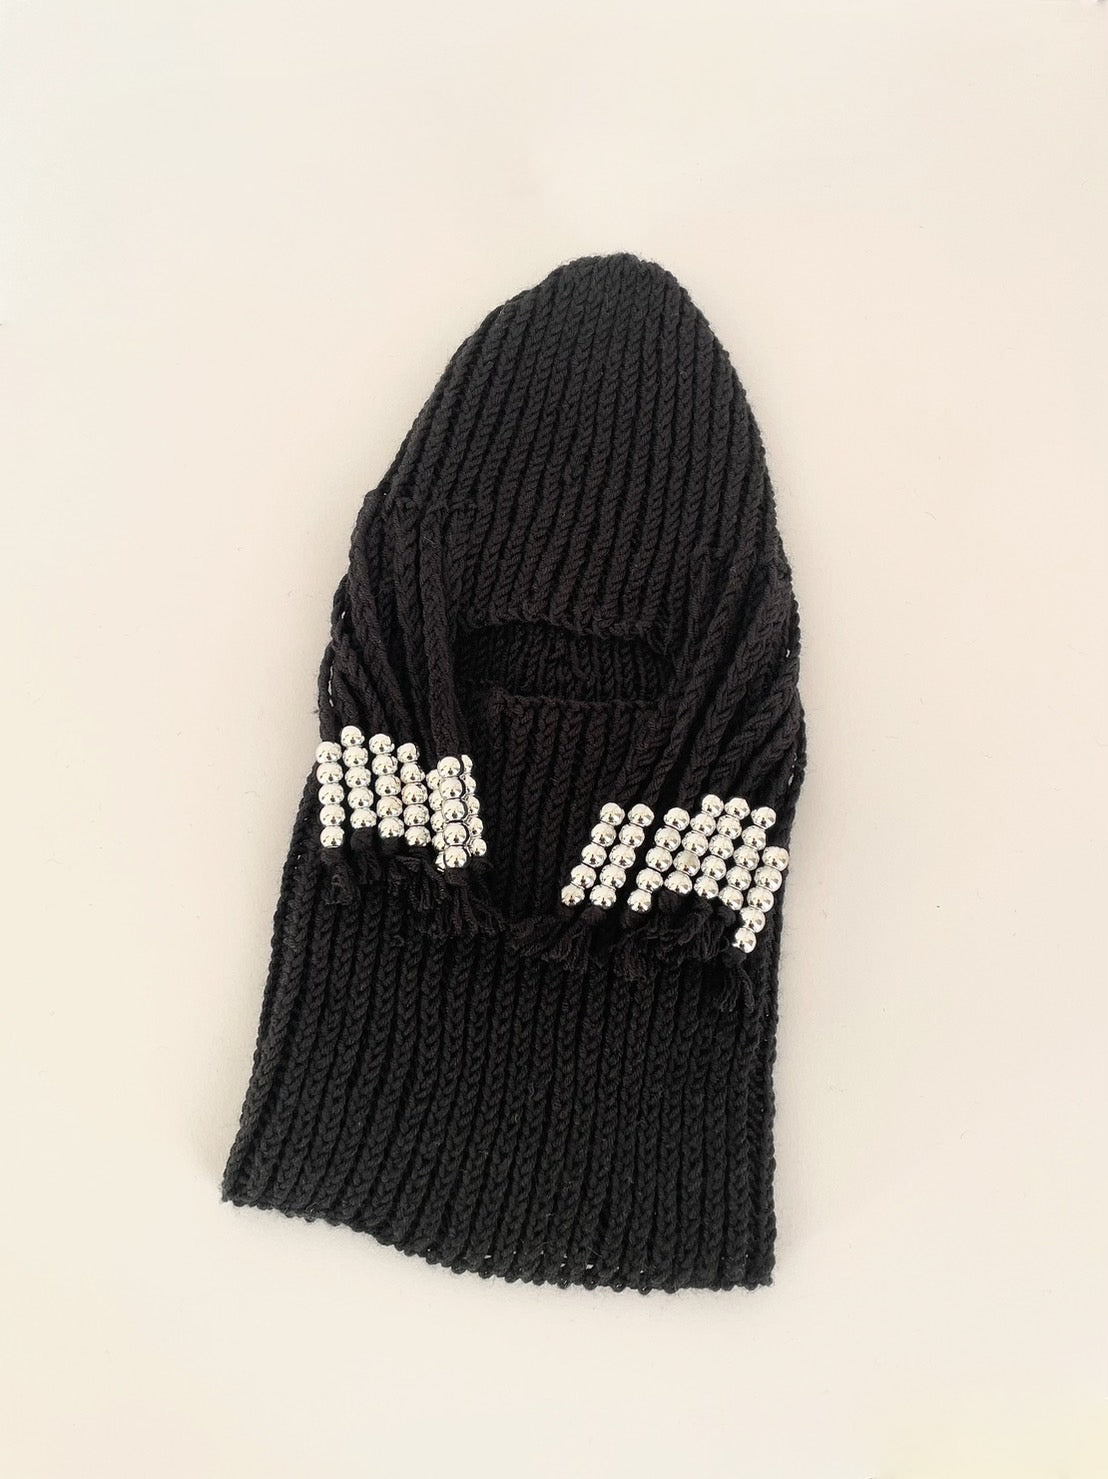 【WOOL】BLACK with SILVER BEADS